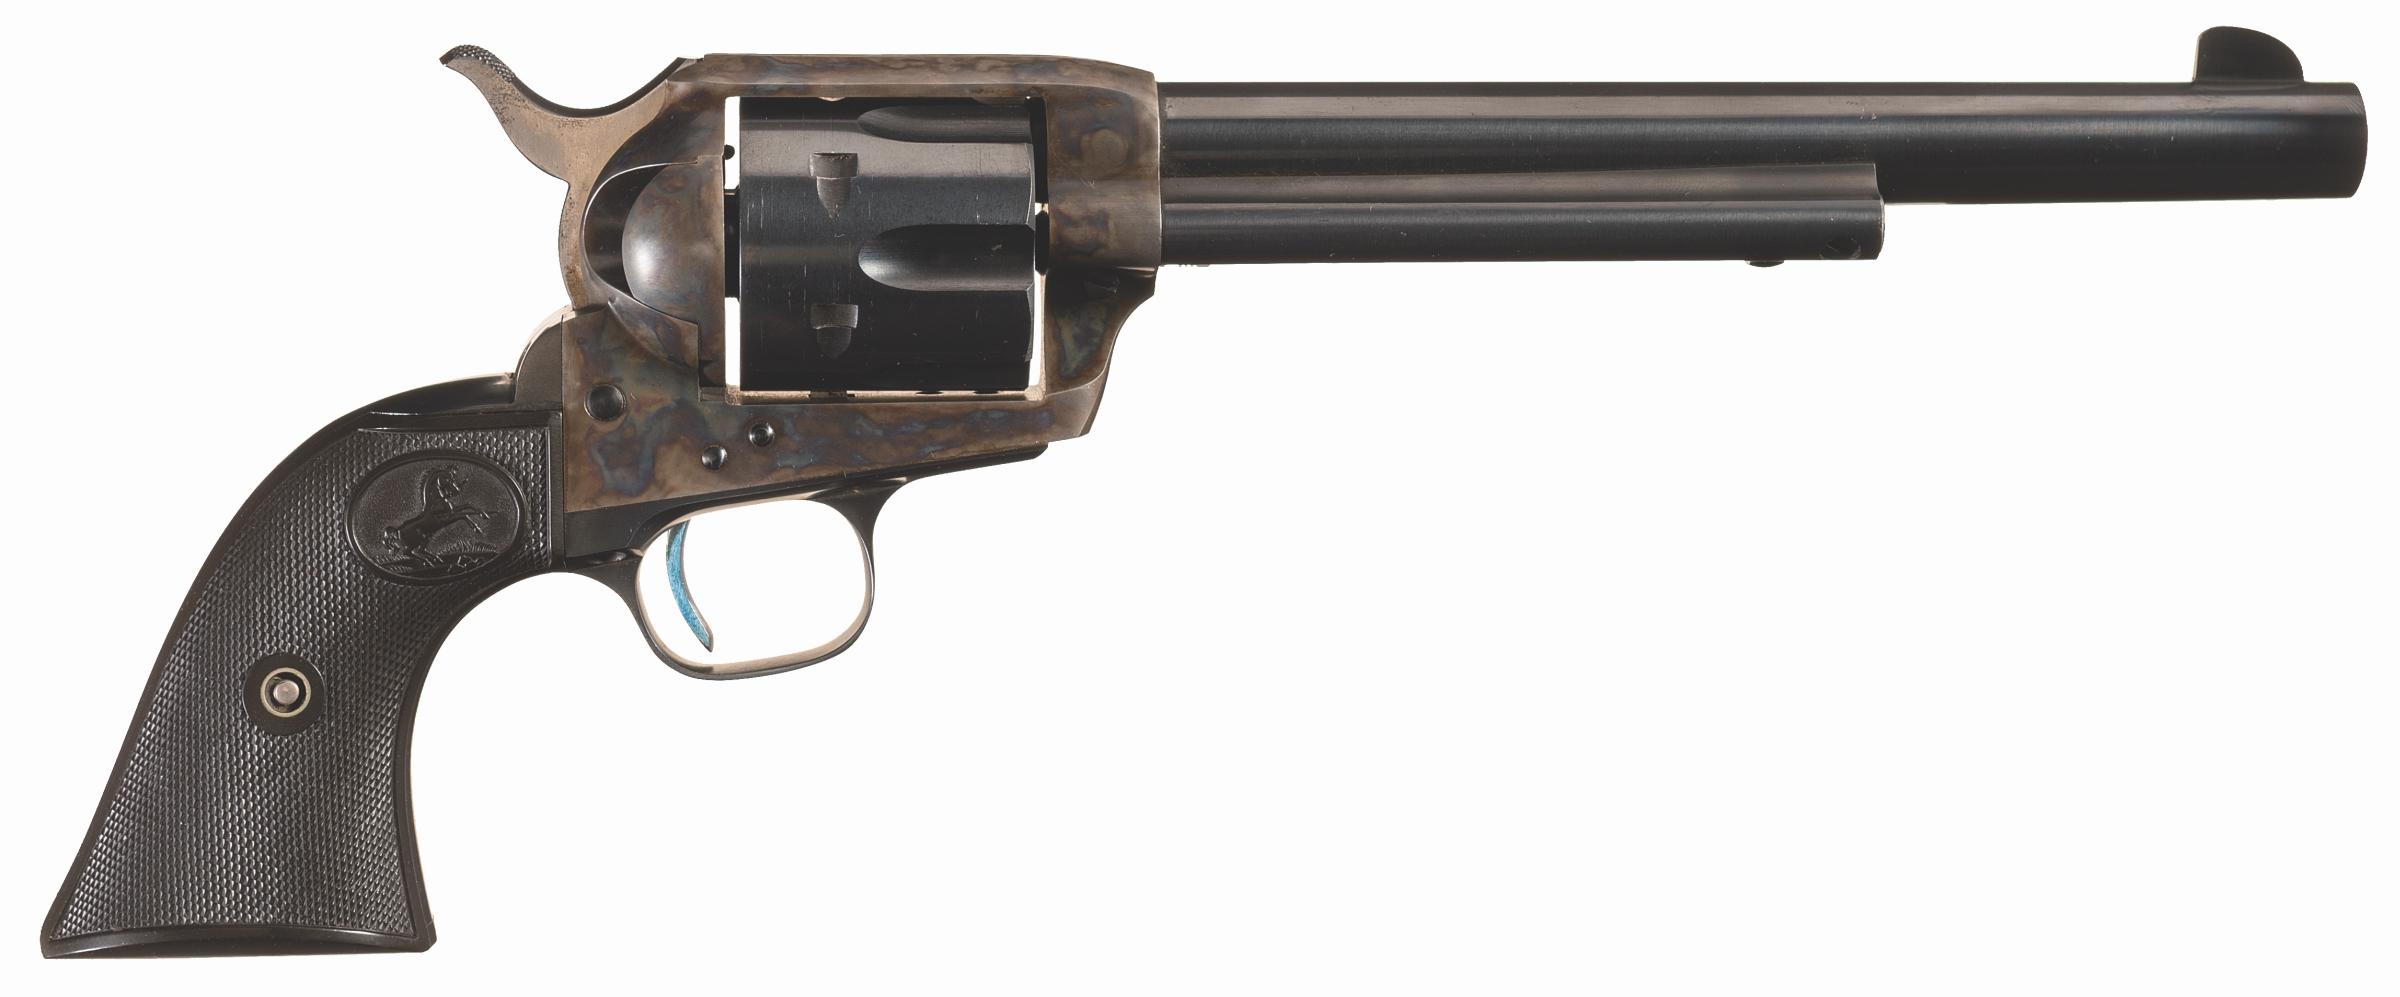 Colt Frontier Six Shooter Single Action Army Revolver